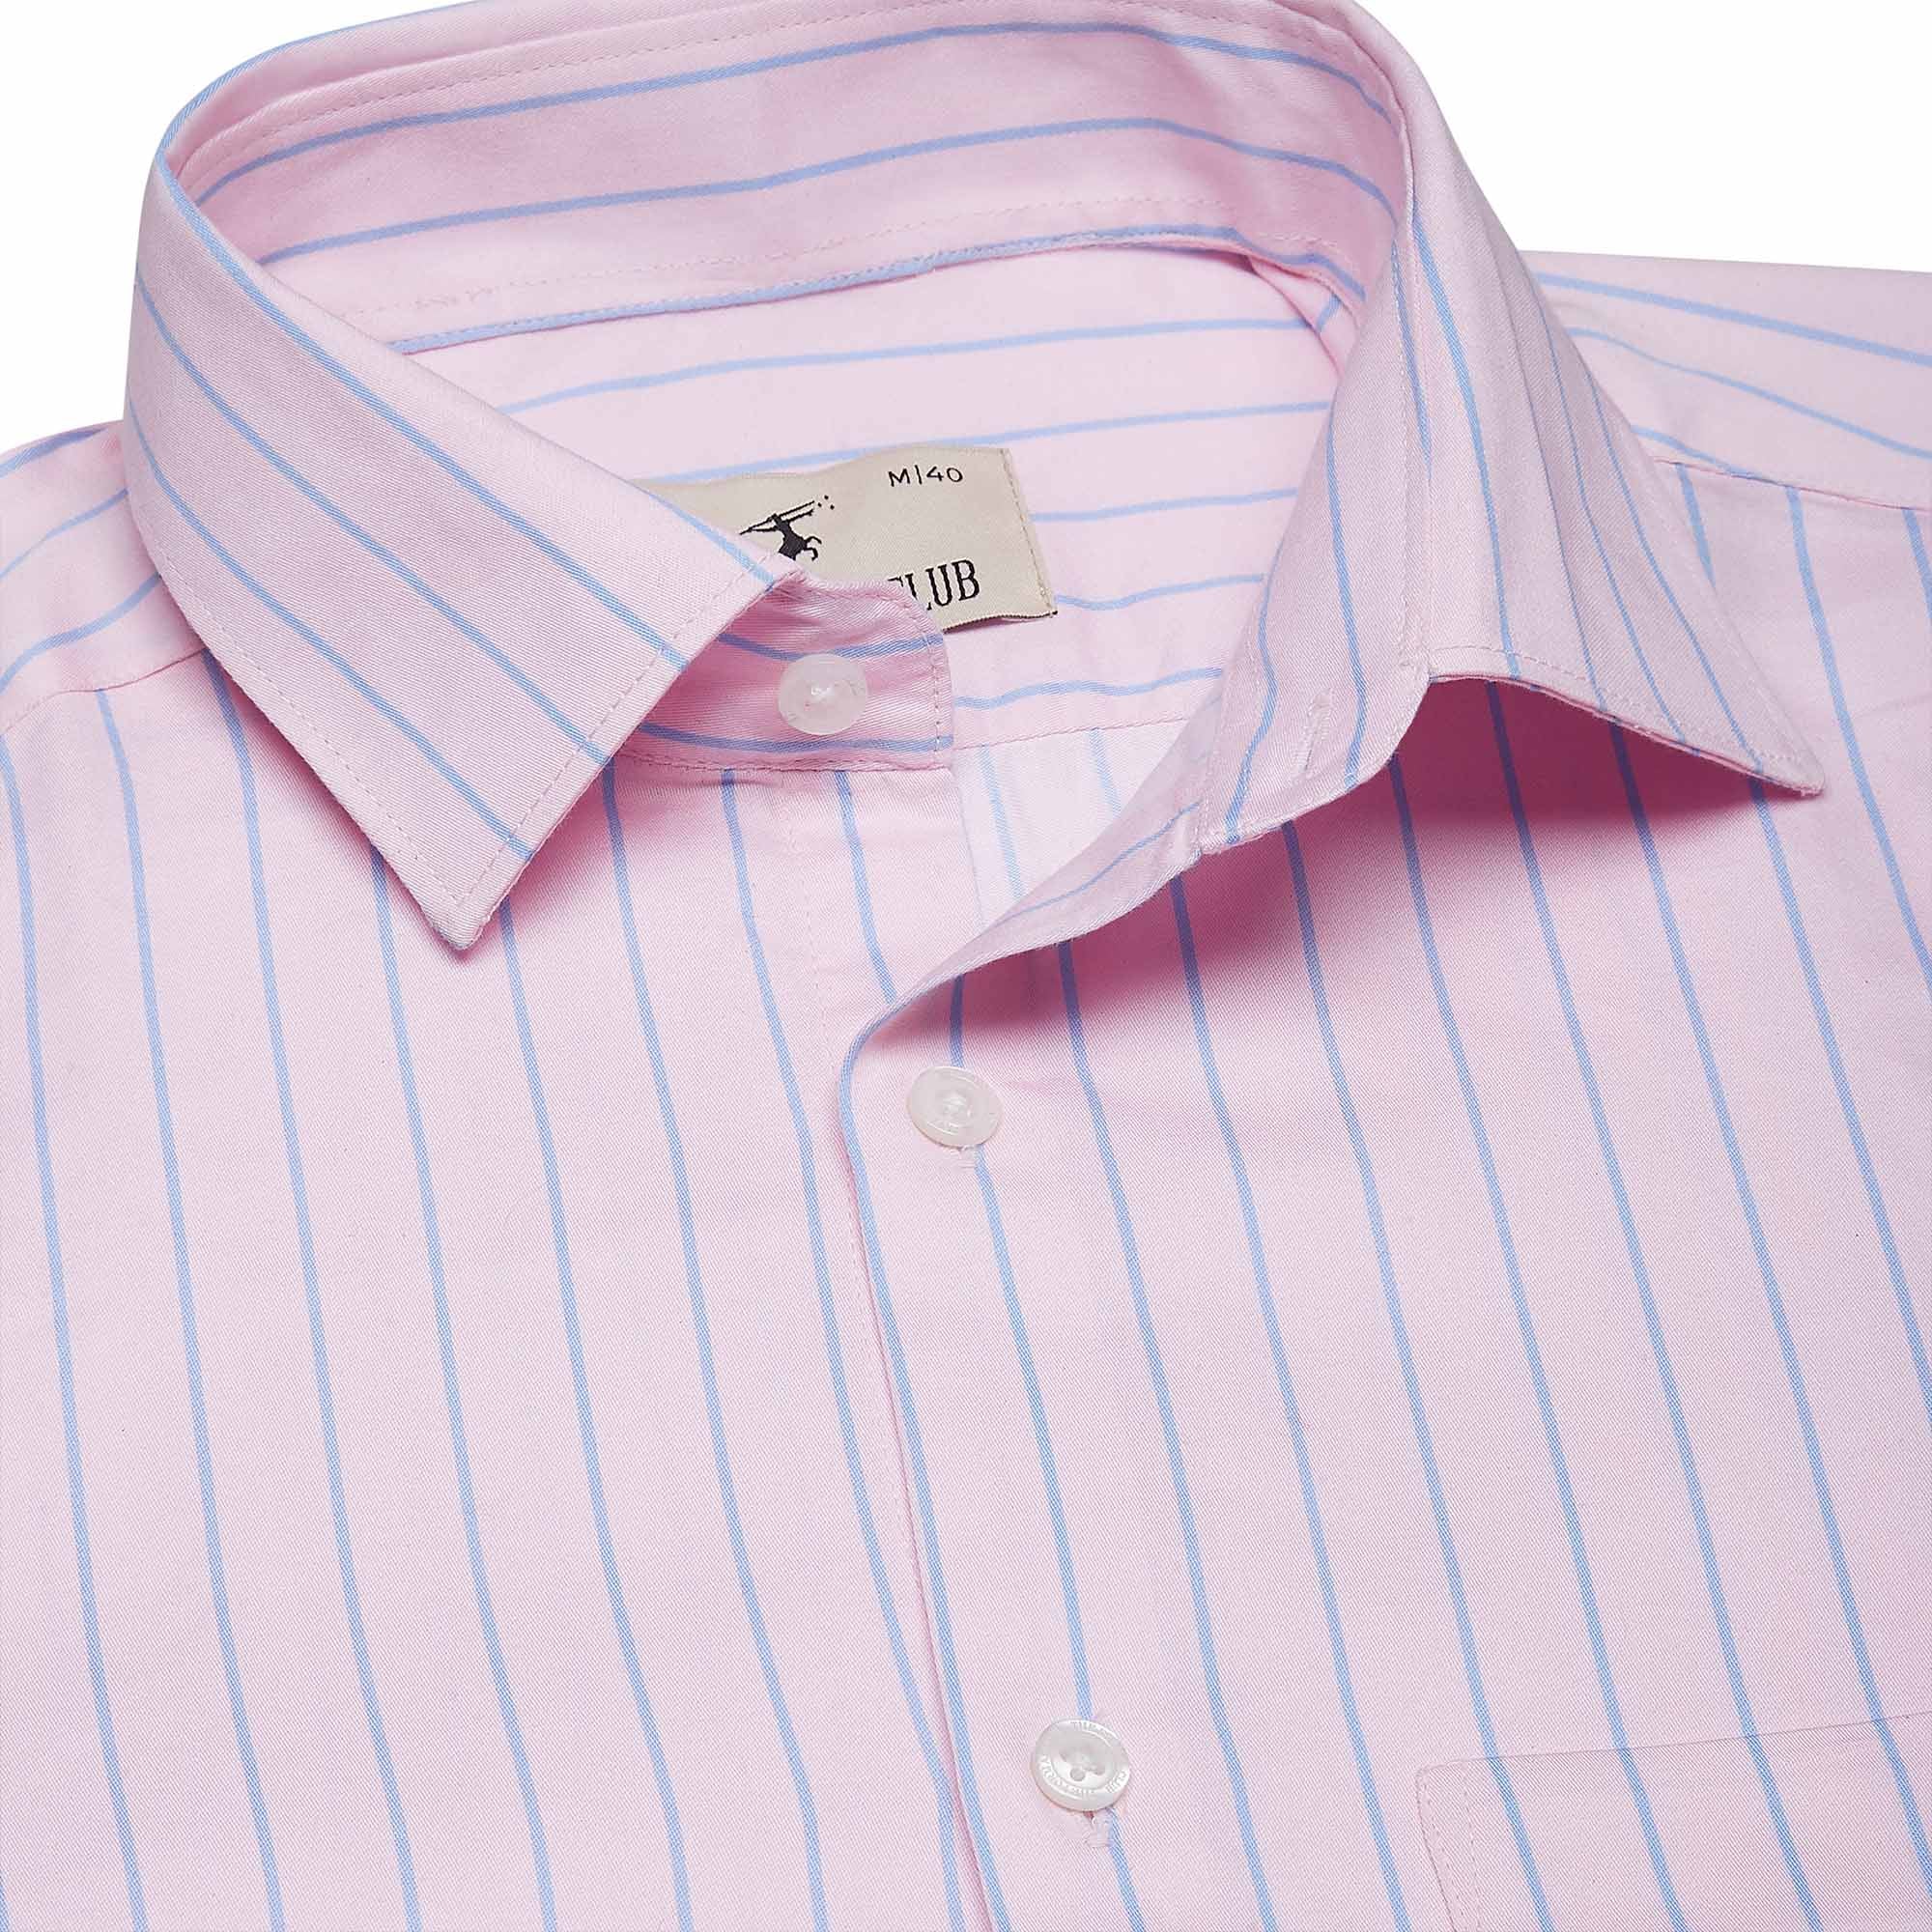 Enigma Blue Stripes Shirt In Pink - The Formal Club